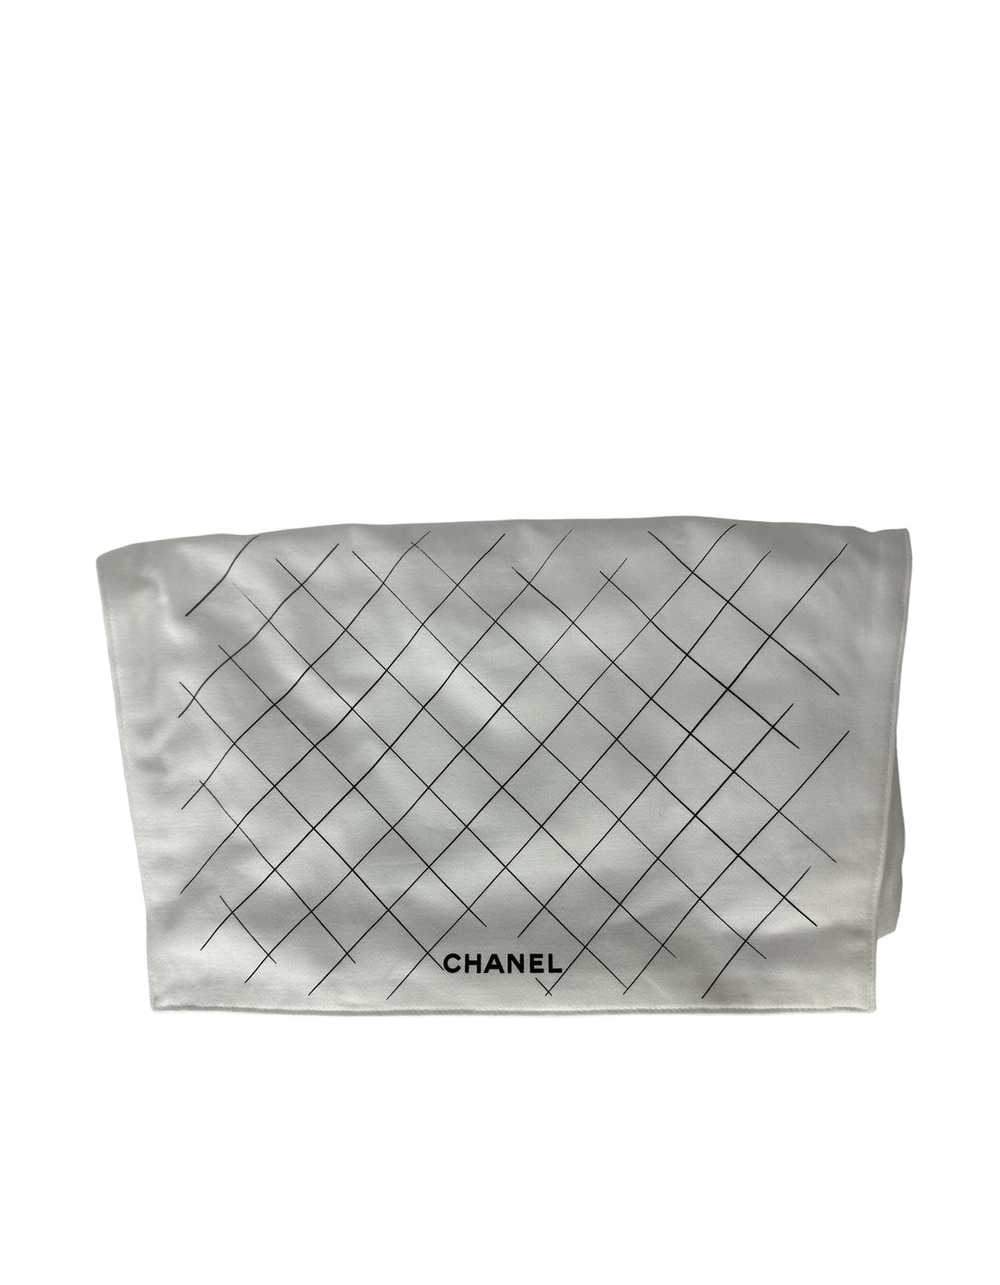 Chanel Black Lambskin Leather Quilted Large 19 Bag - image 10